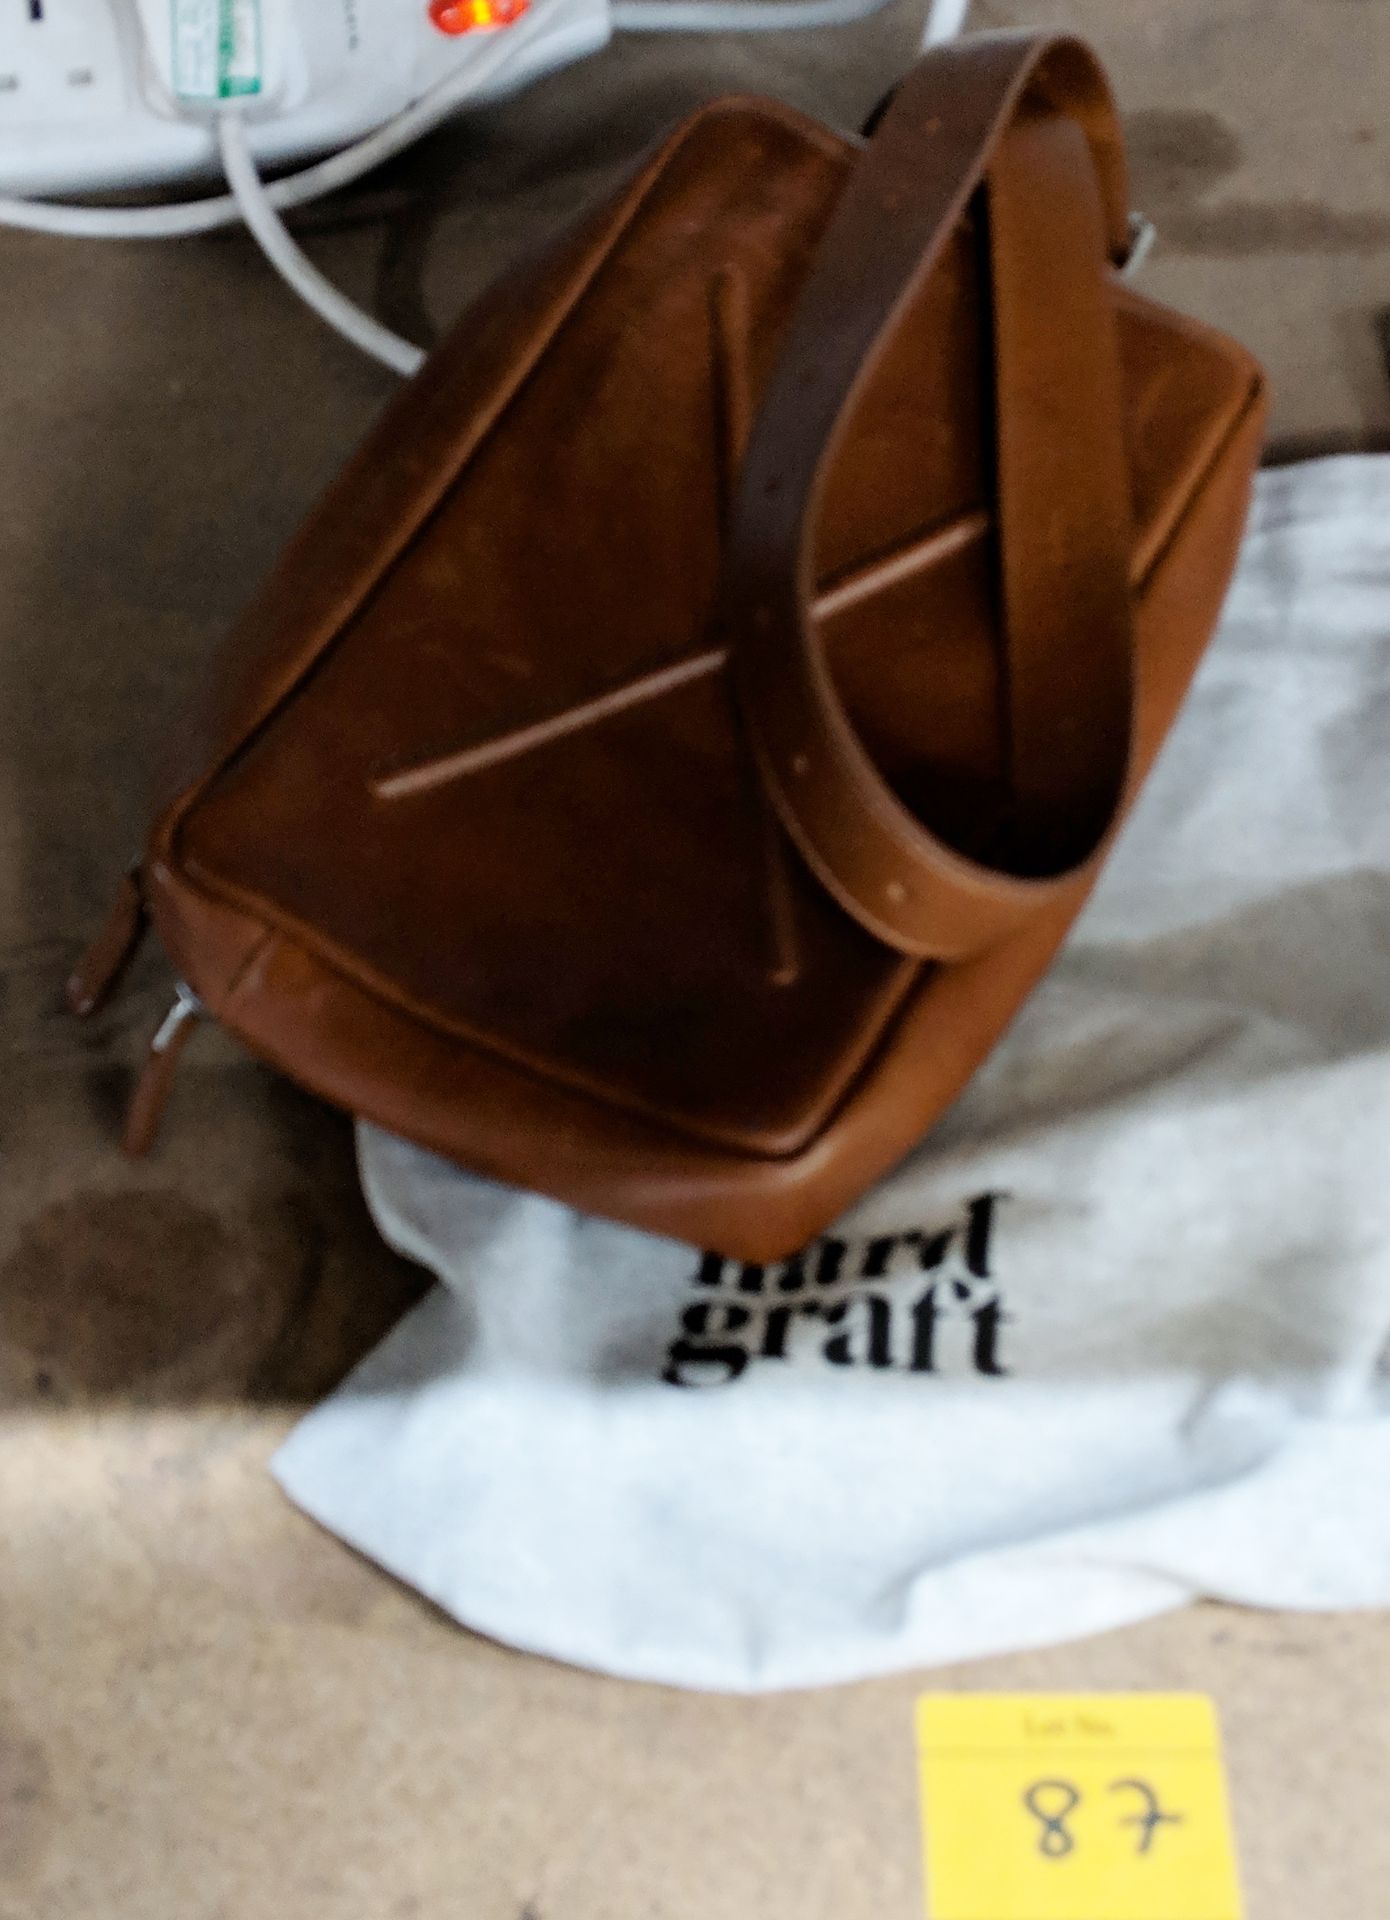 Hard Graft leather "Phone Pack Classic" man bag in brown leather with adjustable strap, including - Image 4 of 8